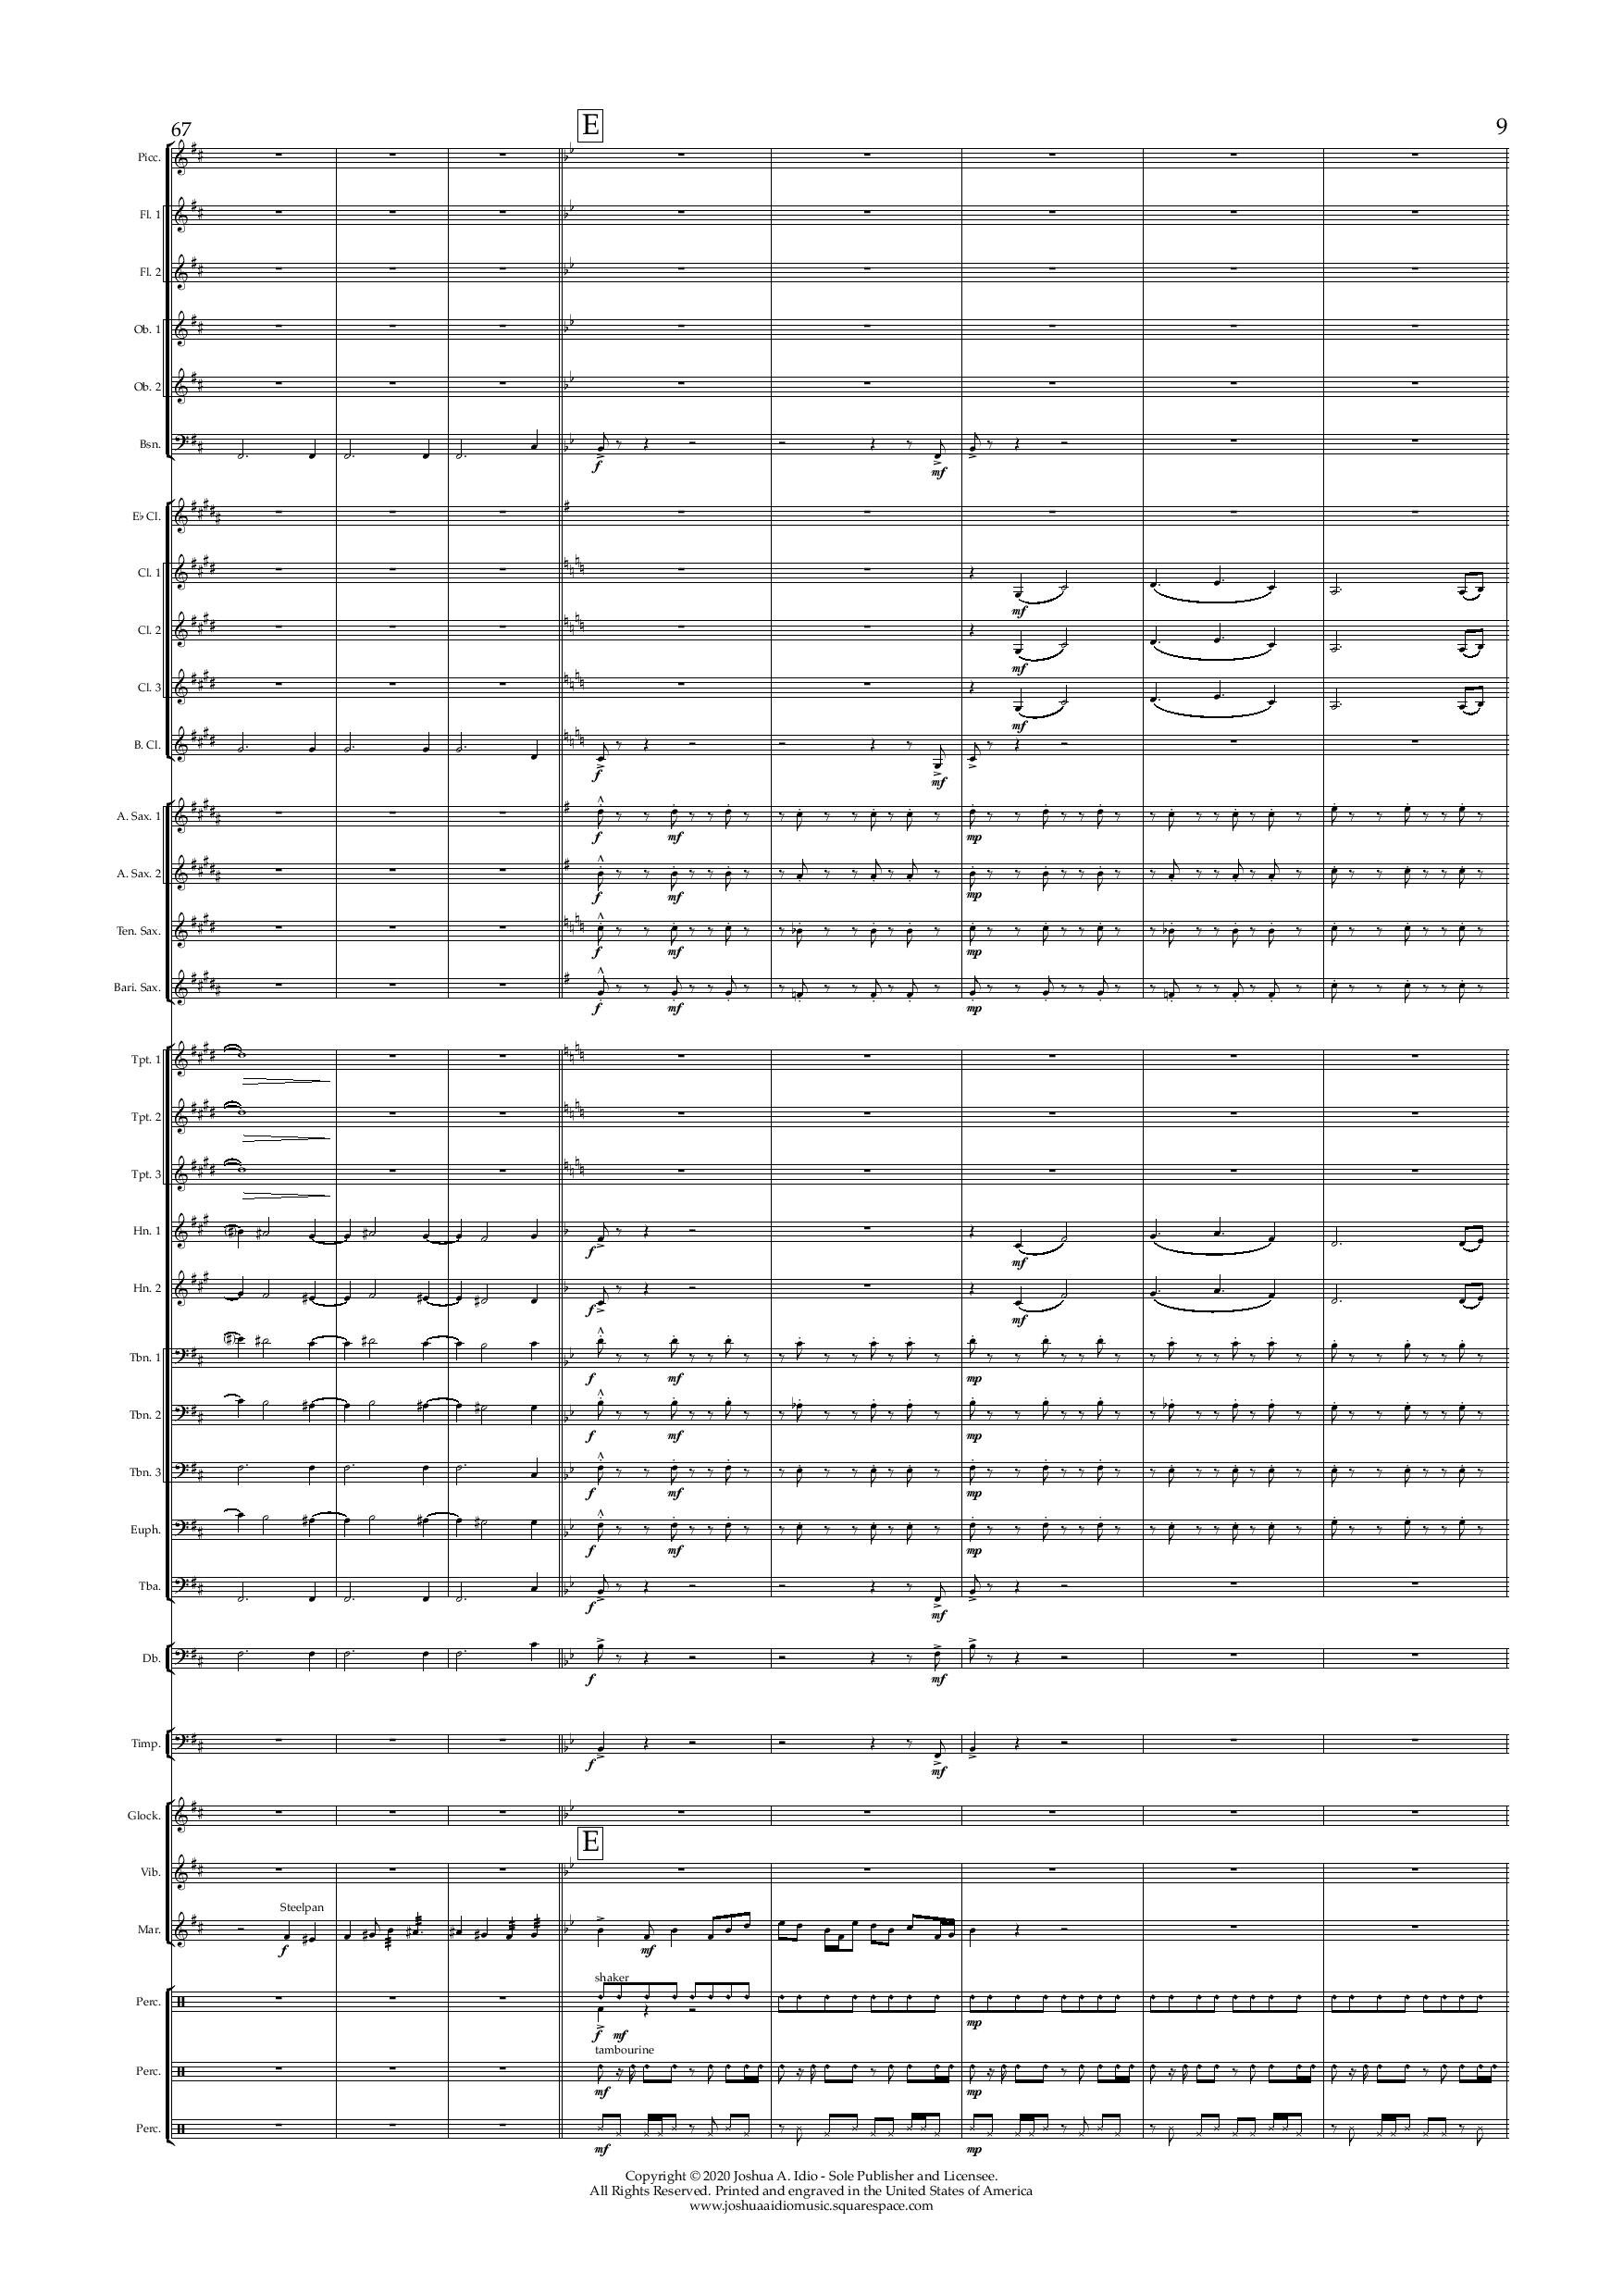 The Cruise Line Dream - Conductor s Score-page-009.jpg